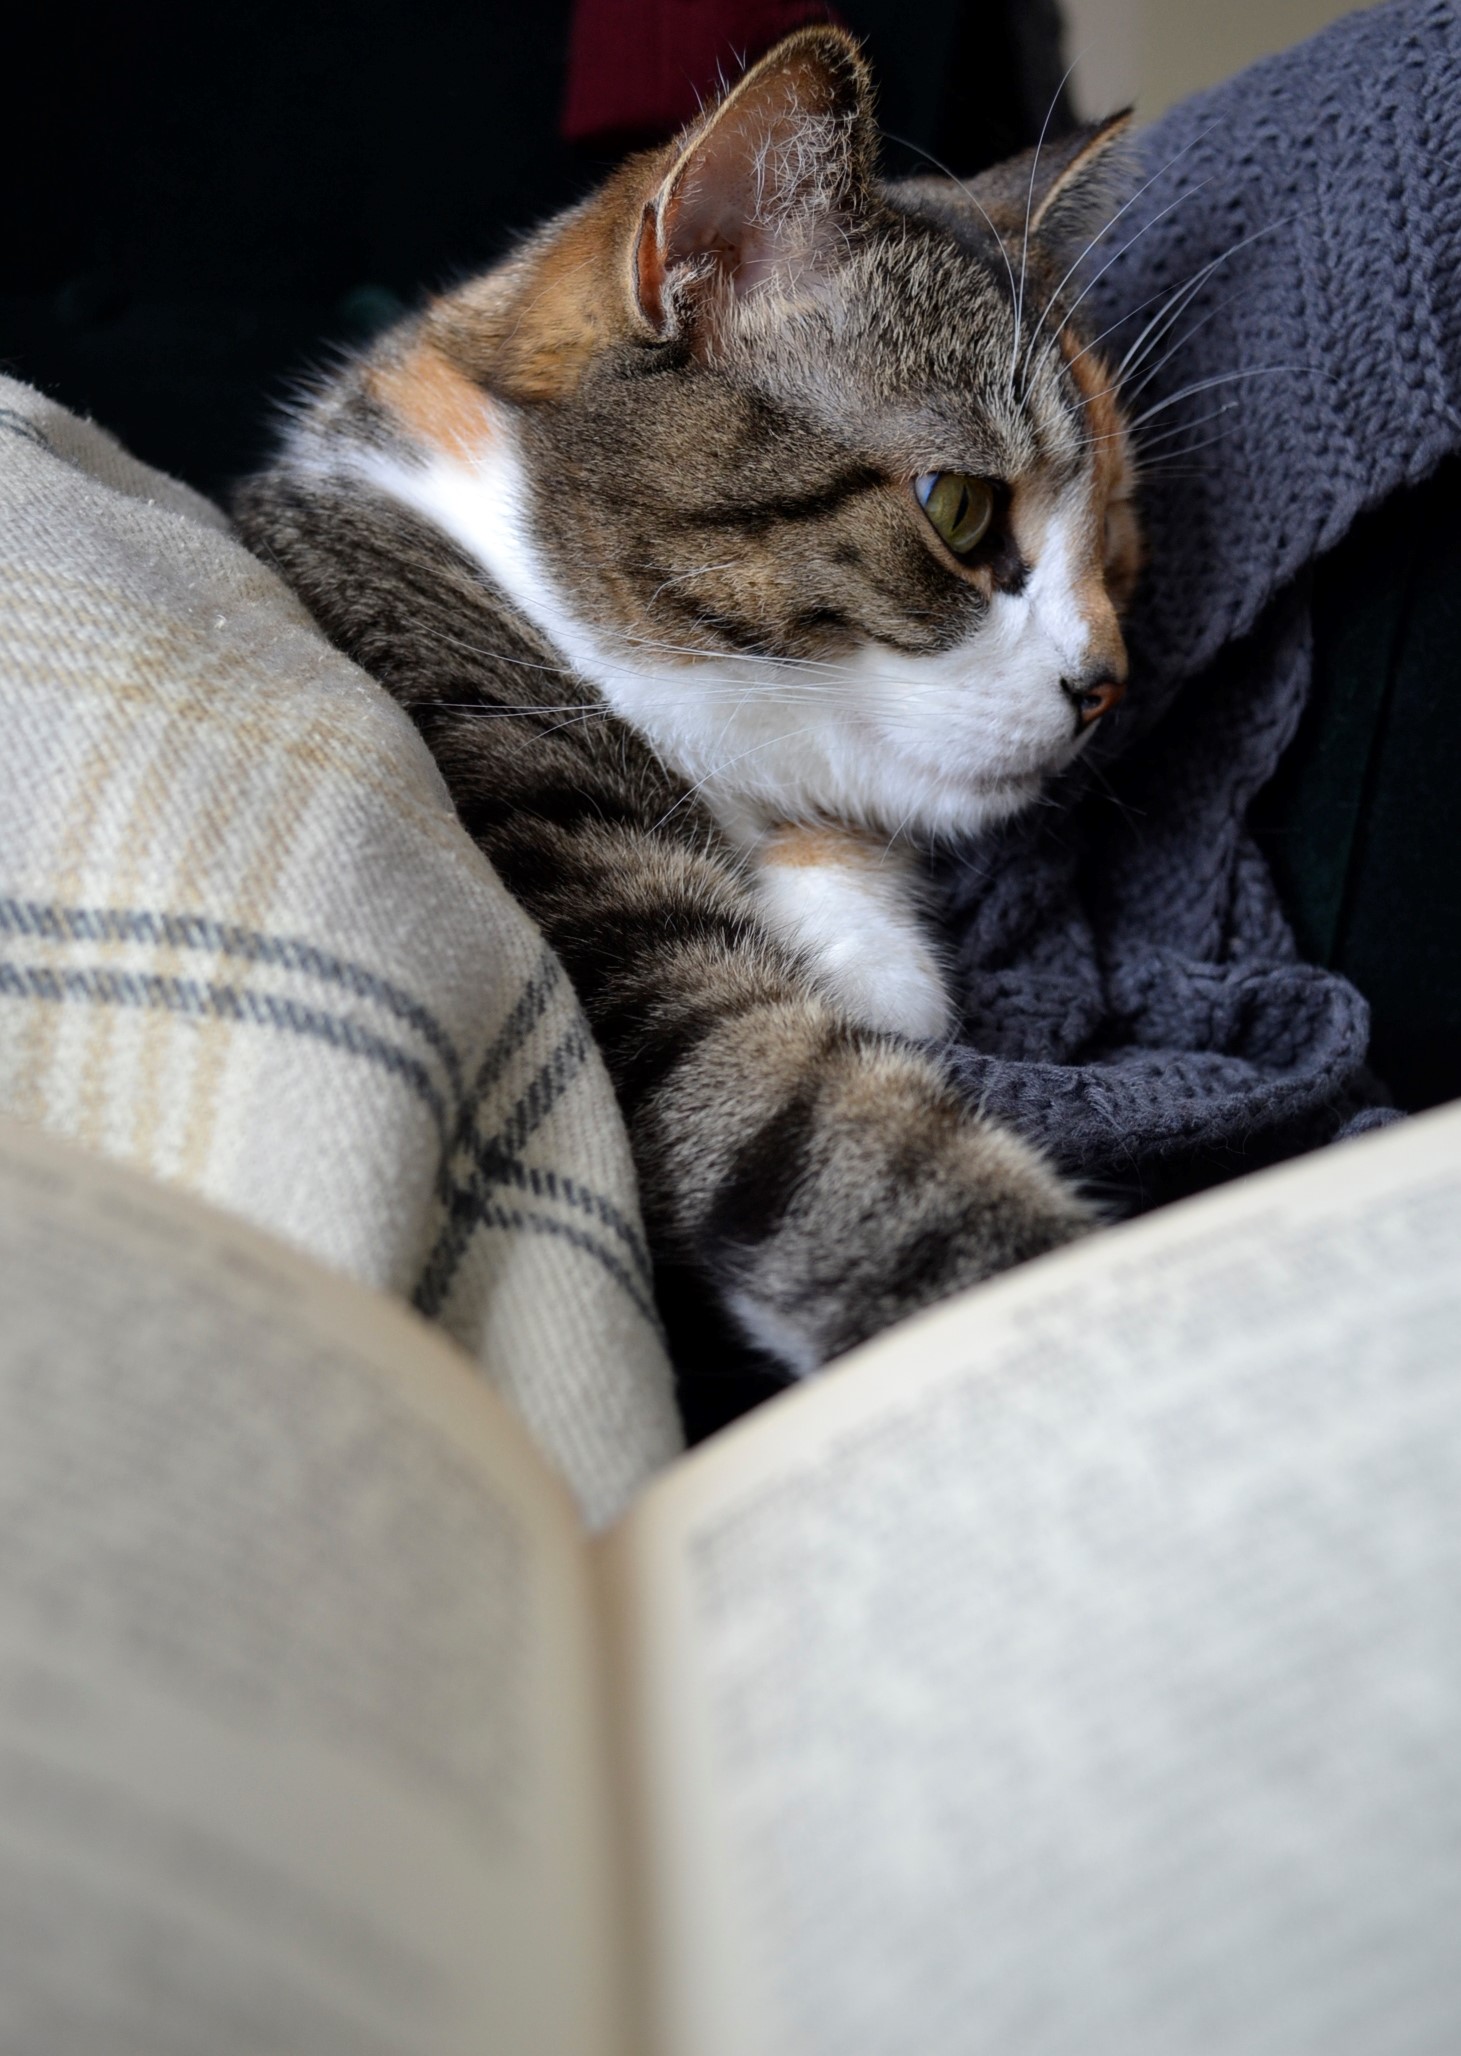 A calico tabby cats reads and old book.